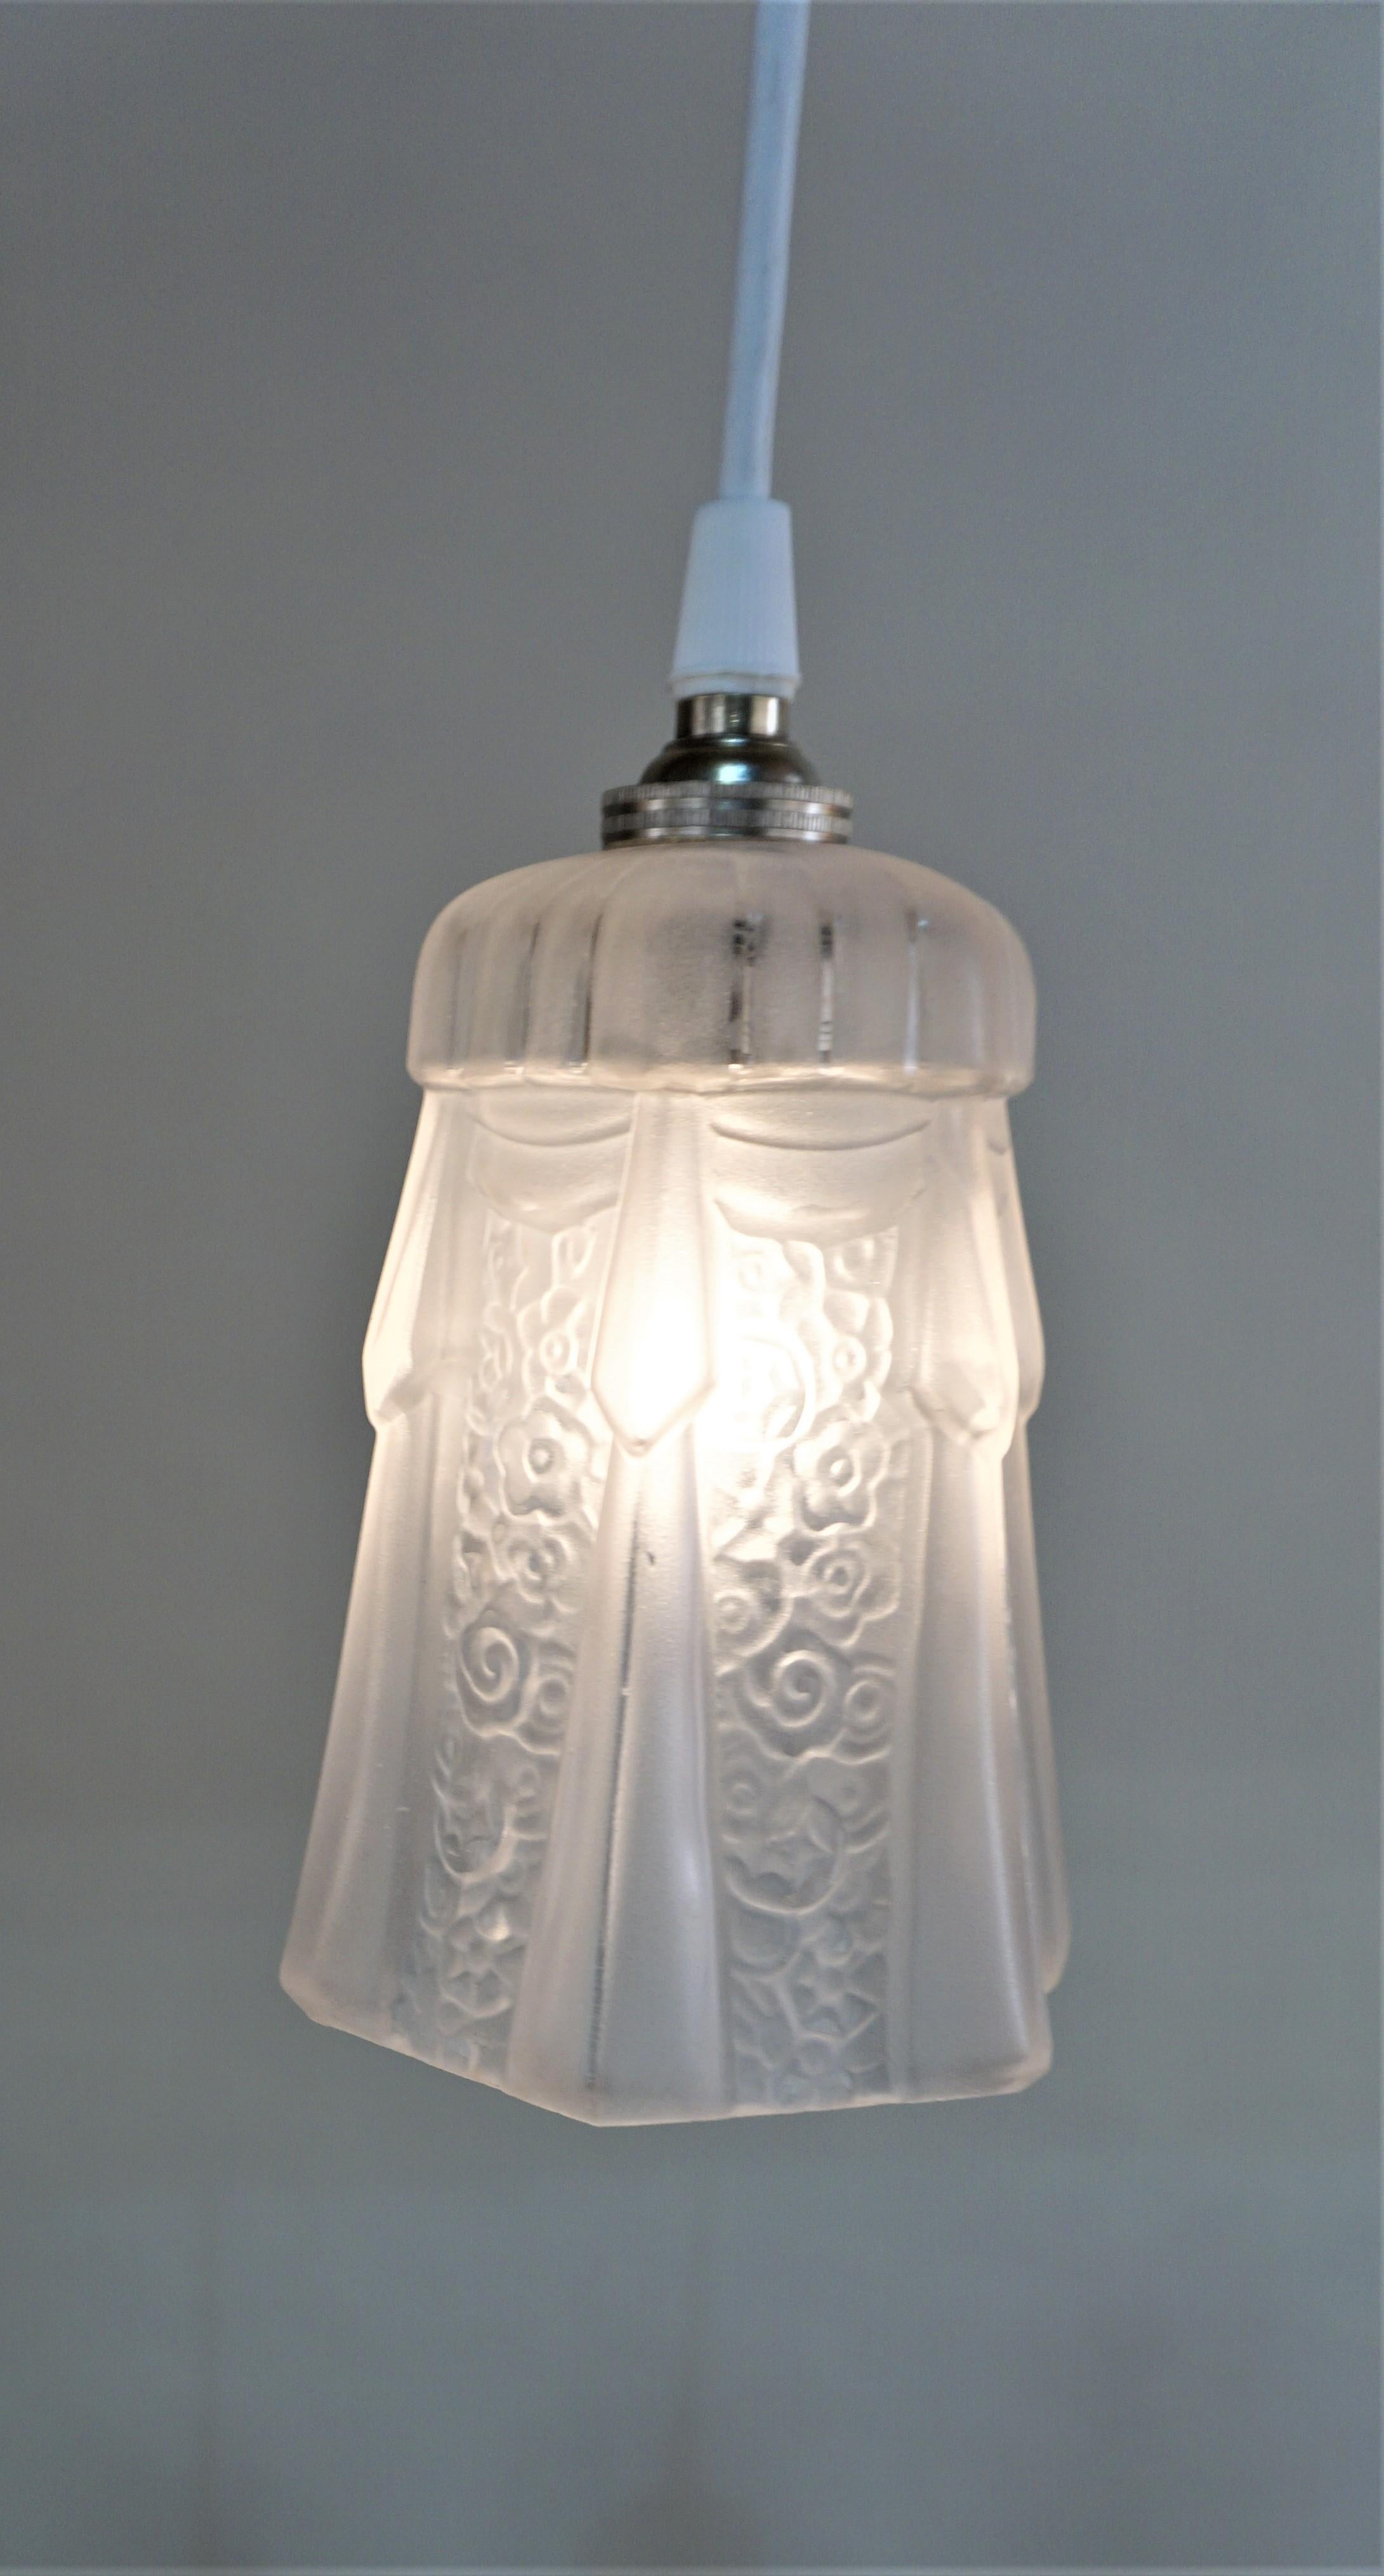 Set of three 1930s Art Deco glass shades that have been modified with new white cord and nickel canopy as pendant lights.

Price is for set of 3.